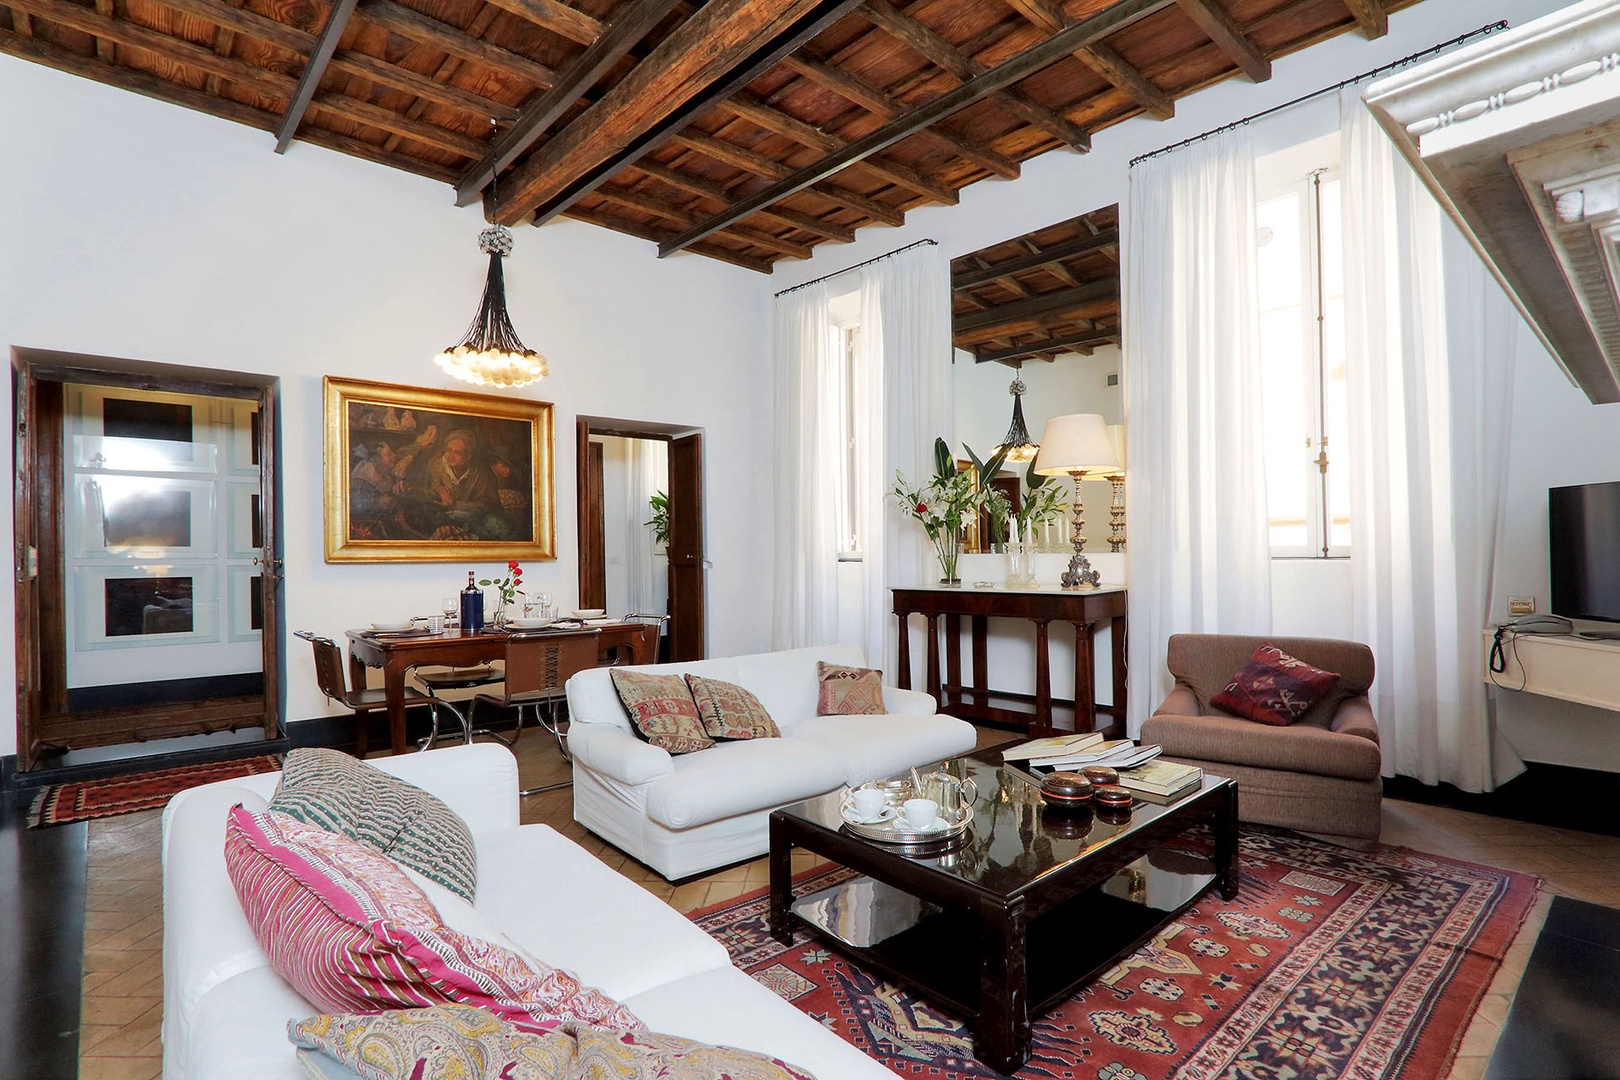 The large living room is filled with light from two large windows which overlook Via Bocca di Leone.